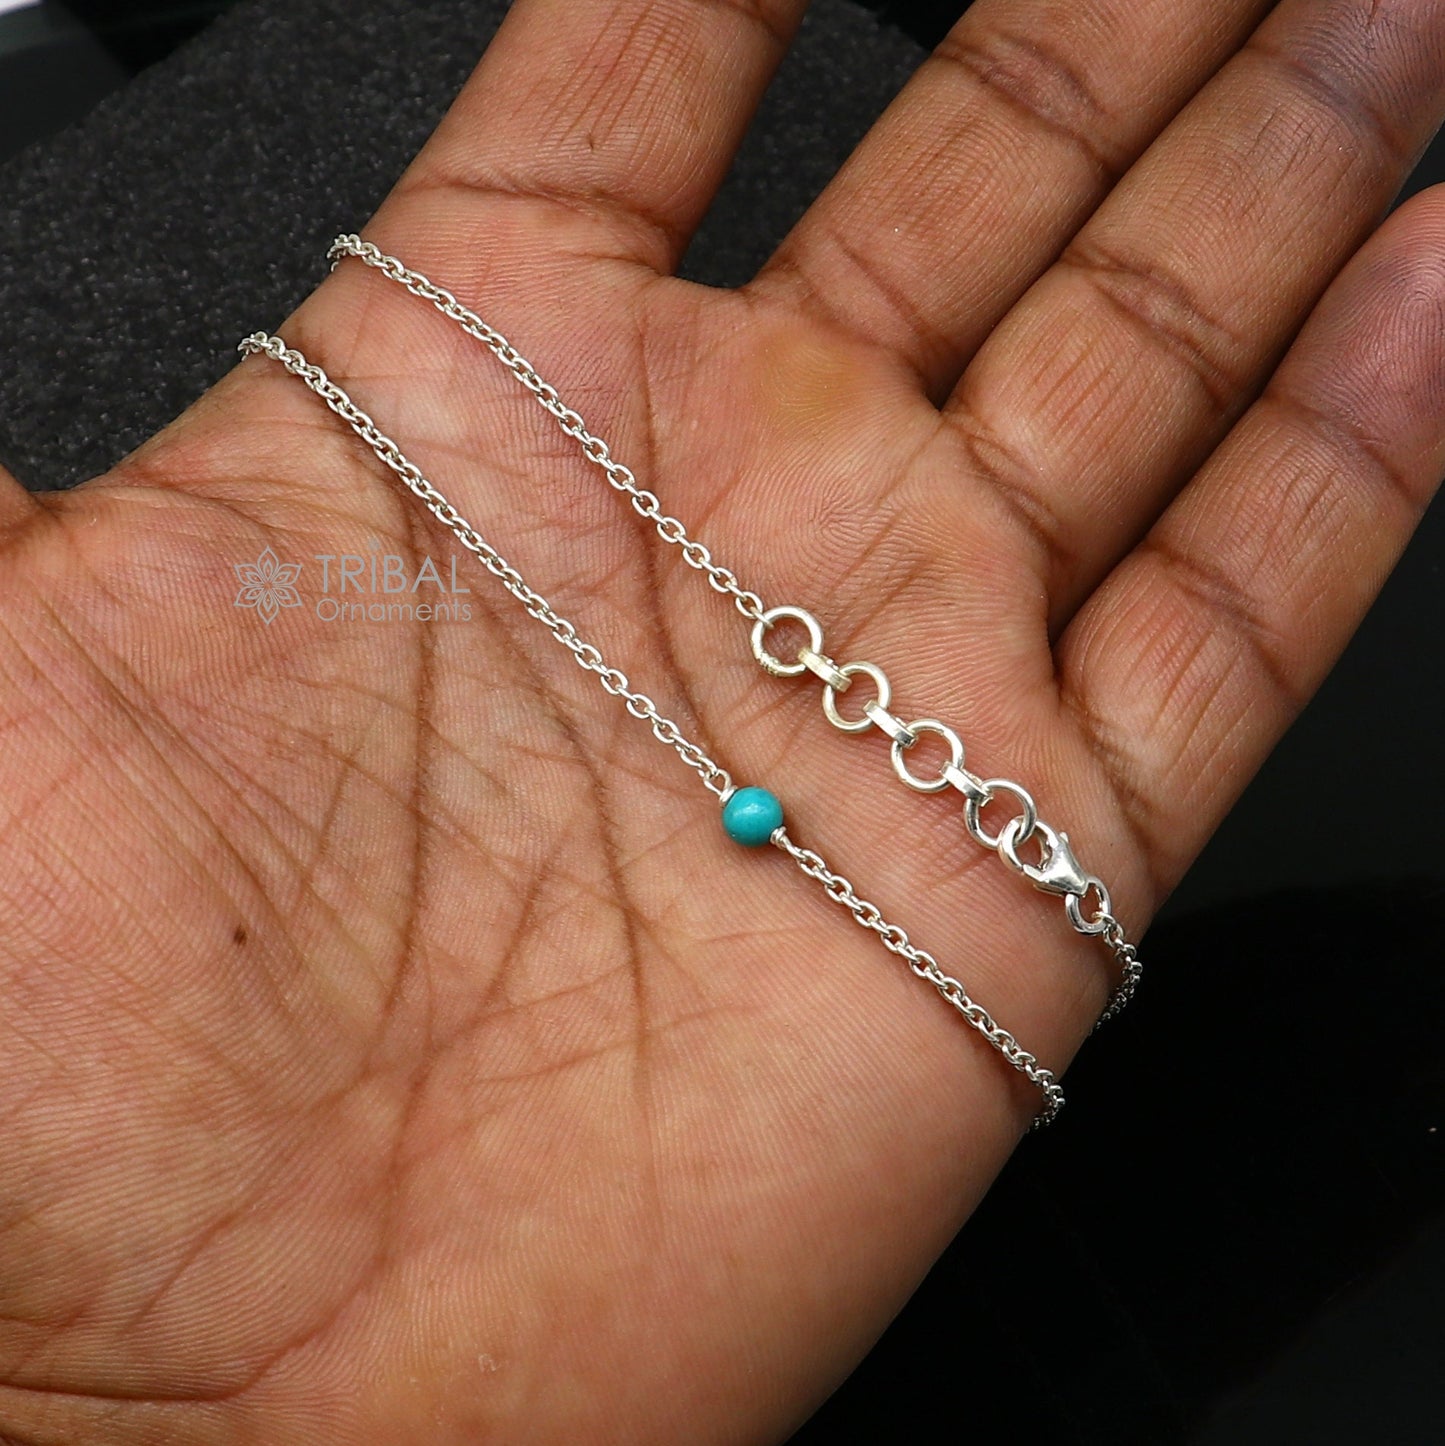 1.5mm 8"to 12" 925 sterling silver chain Single turquoise stone anklet bracelet amazing light weight delicate anklets silver jewelry ank582 - TRIBAL ORNAMENTS